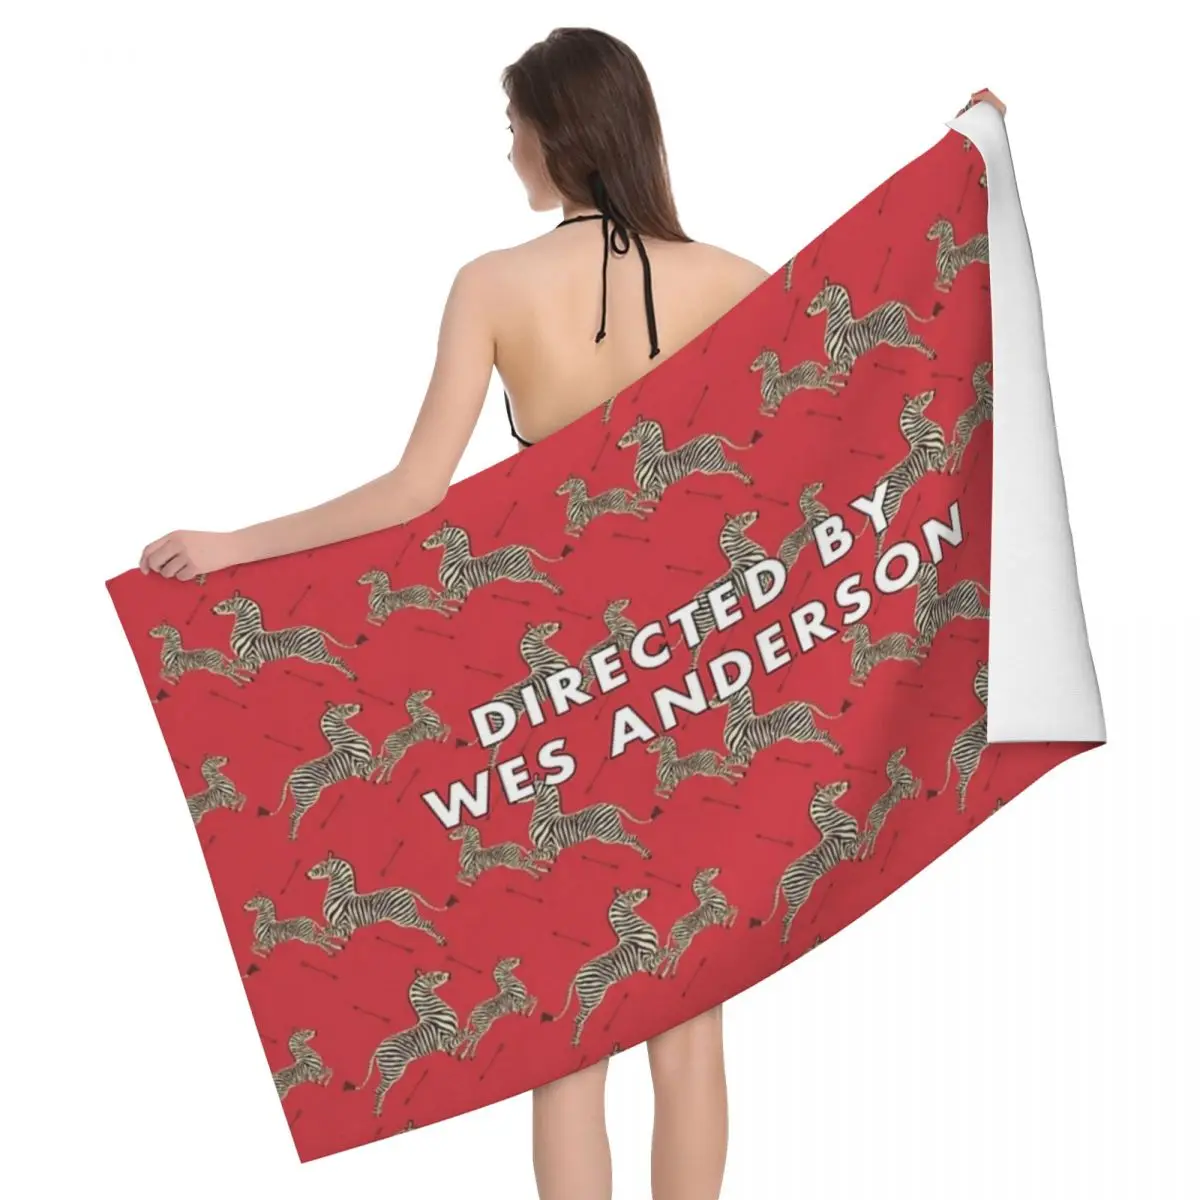 

Directed By Wes Anderson 80x130cm Bath Towel Water-absorbent For Travelling Wedding Gift